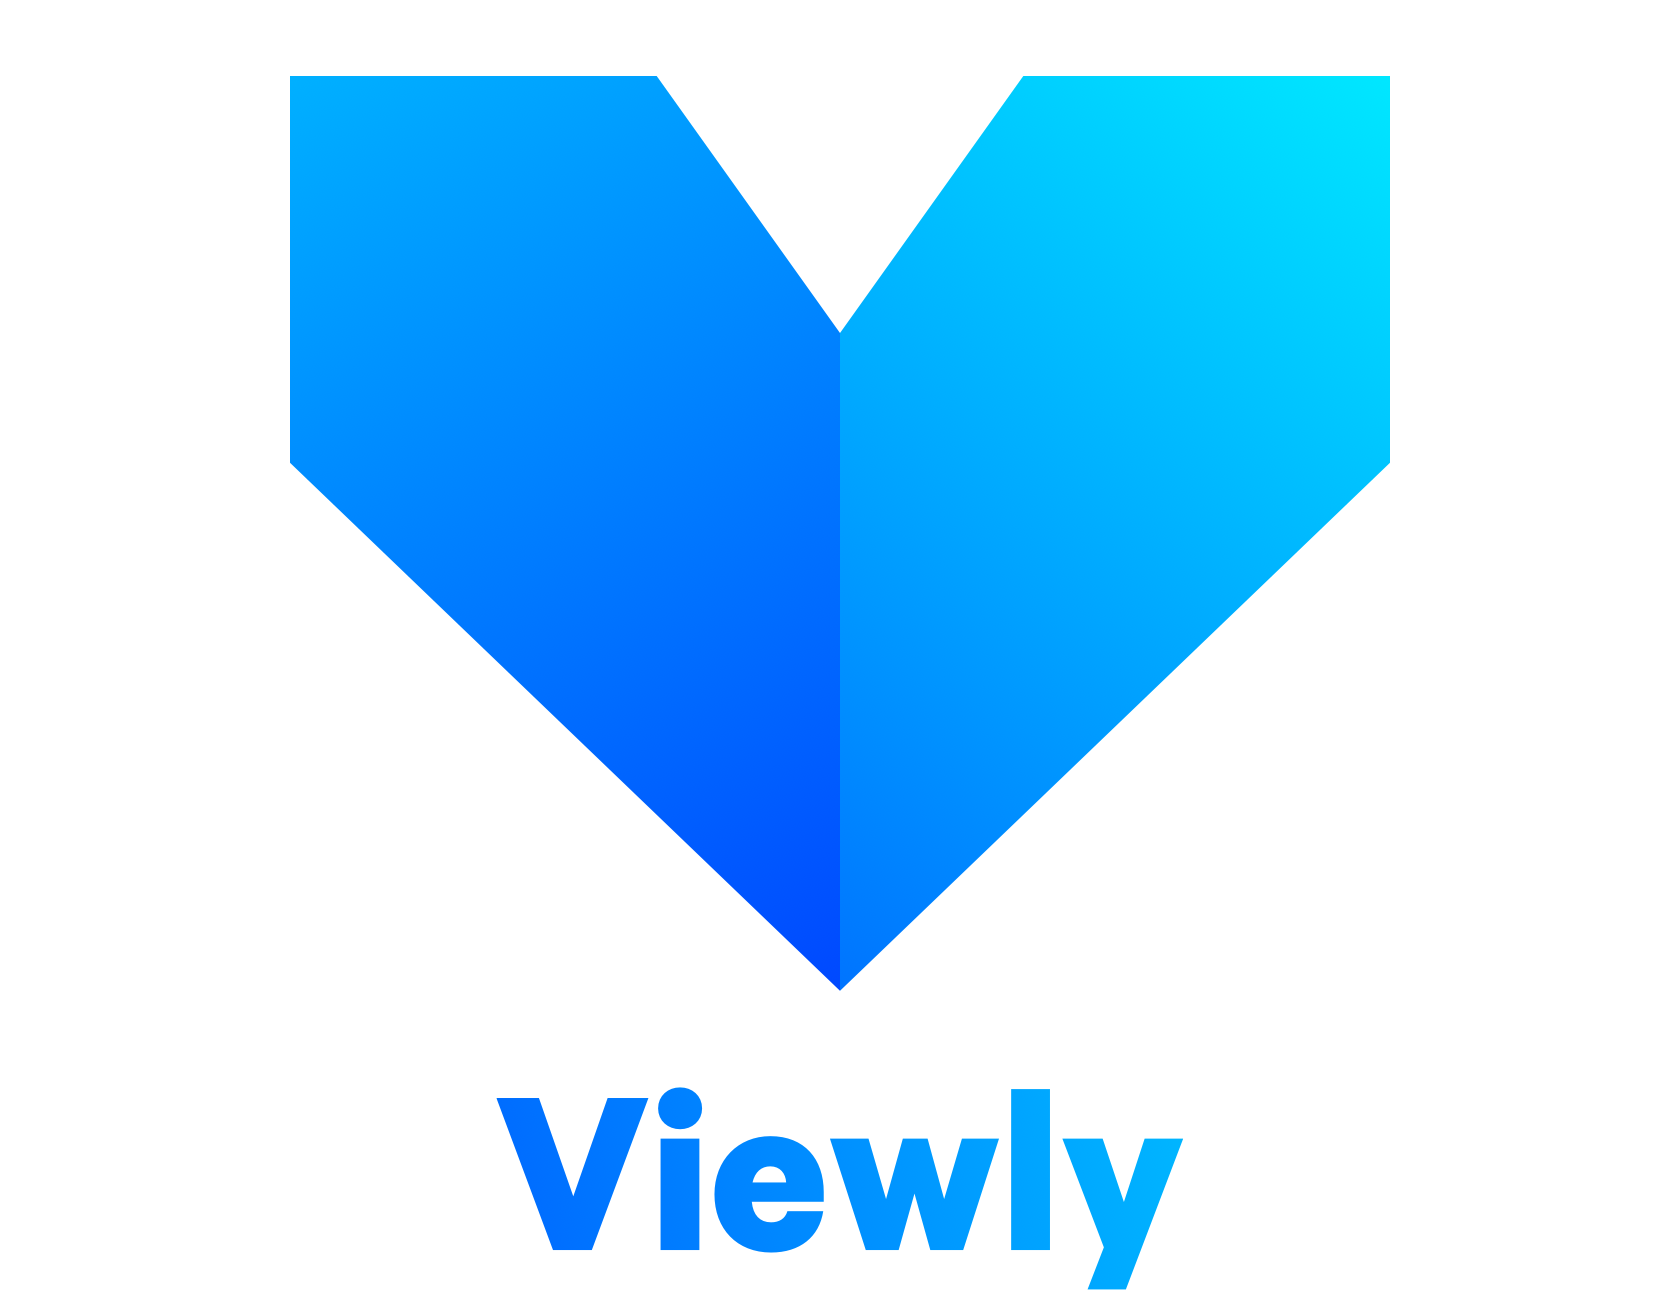 View ICO. View ly